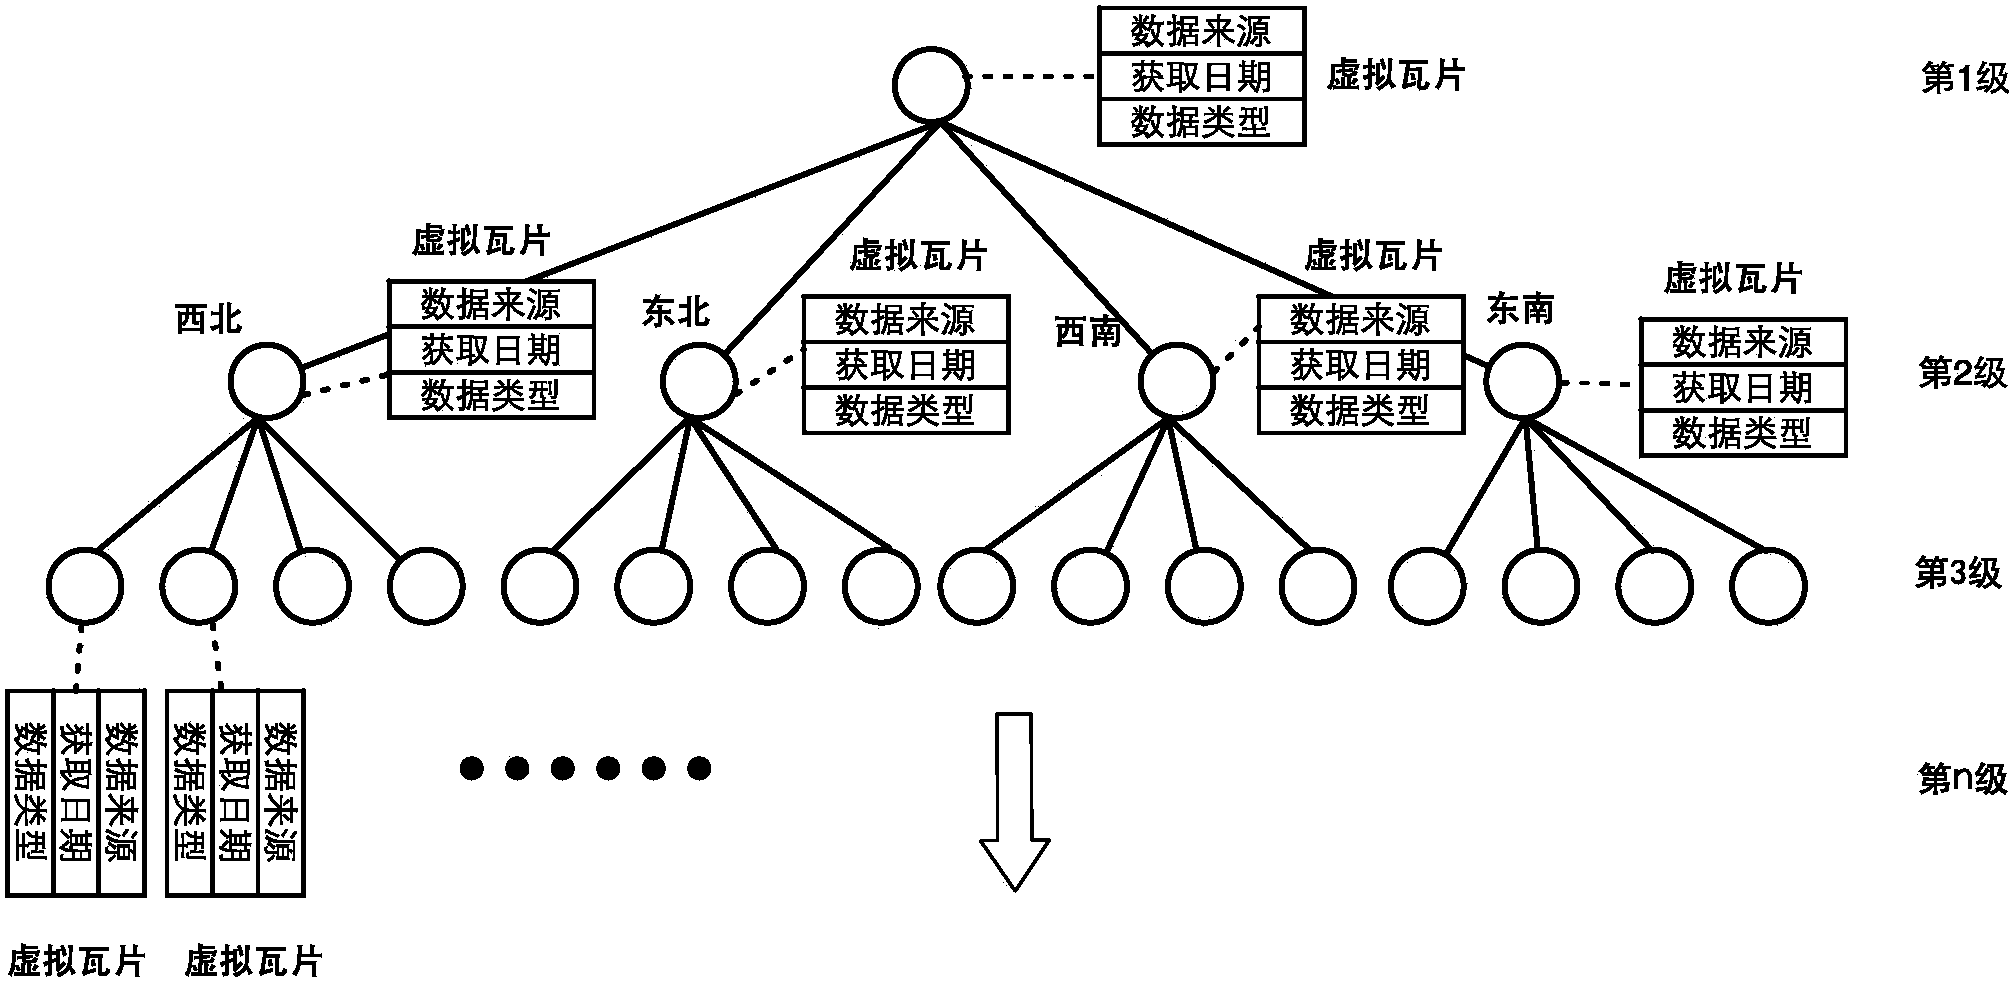 Implement method of lightweight-class global multi-dimensional remote-sensing image network map service